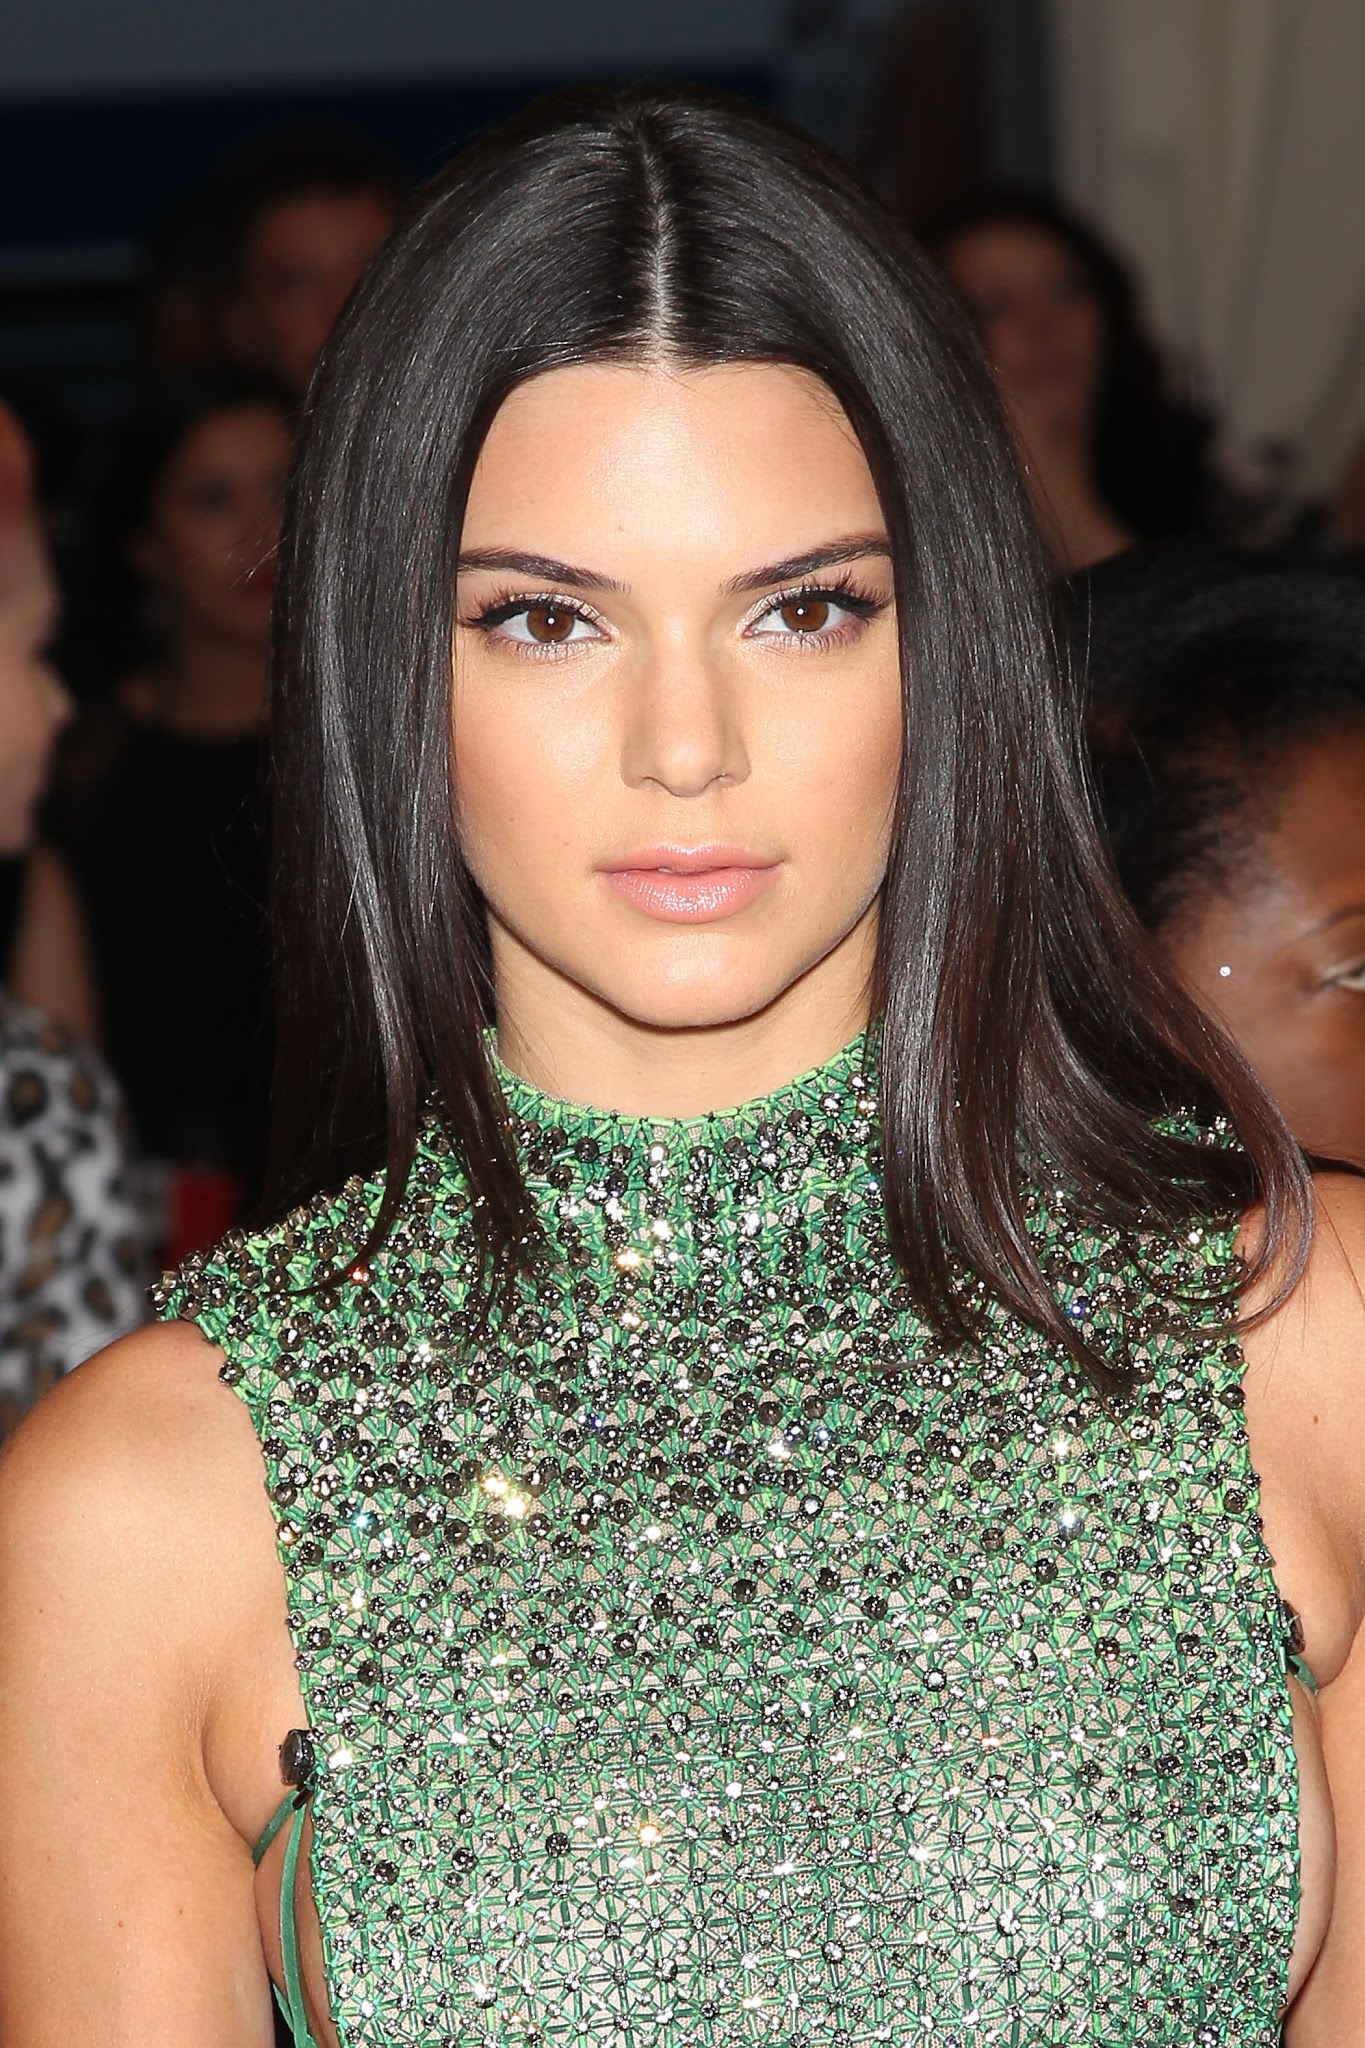 Kendall Jenner Photo Gallery 015f | Kendall Jenner Fans Site